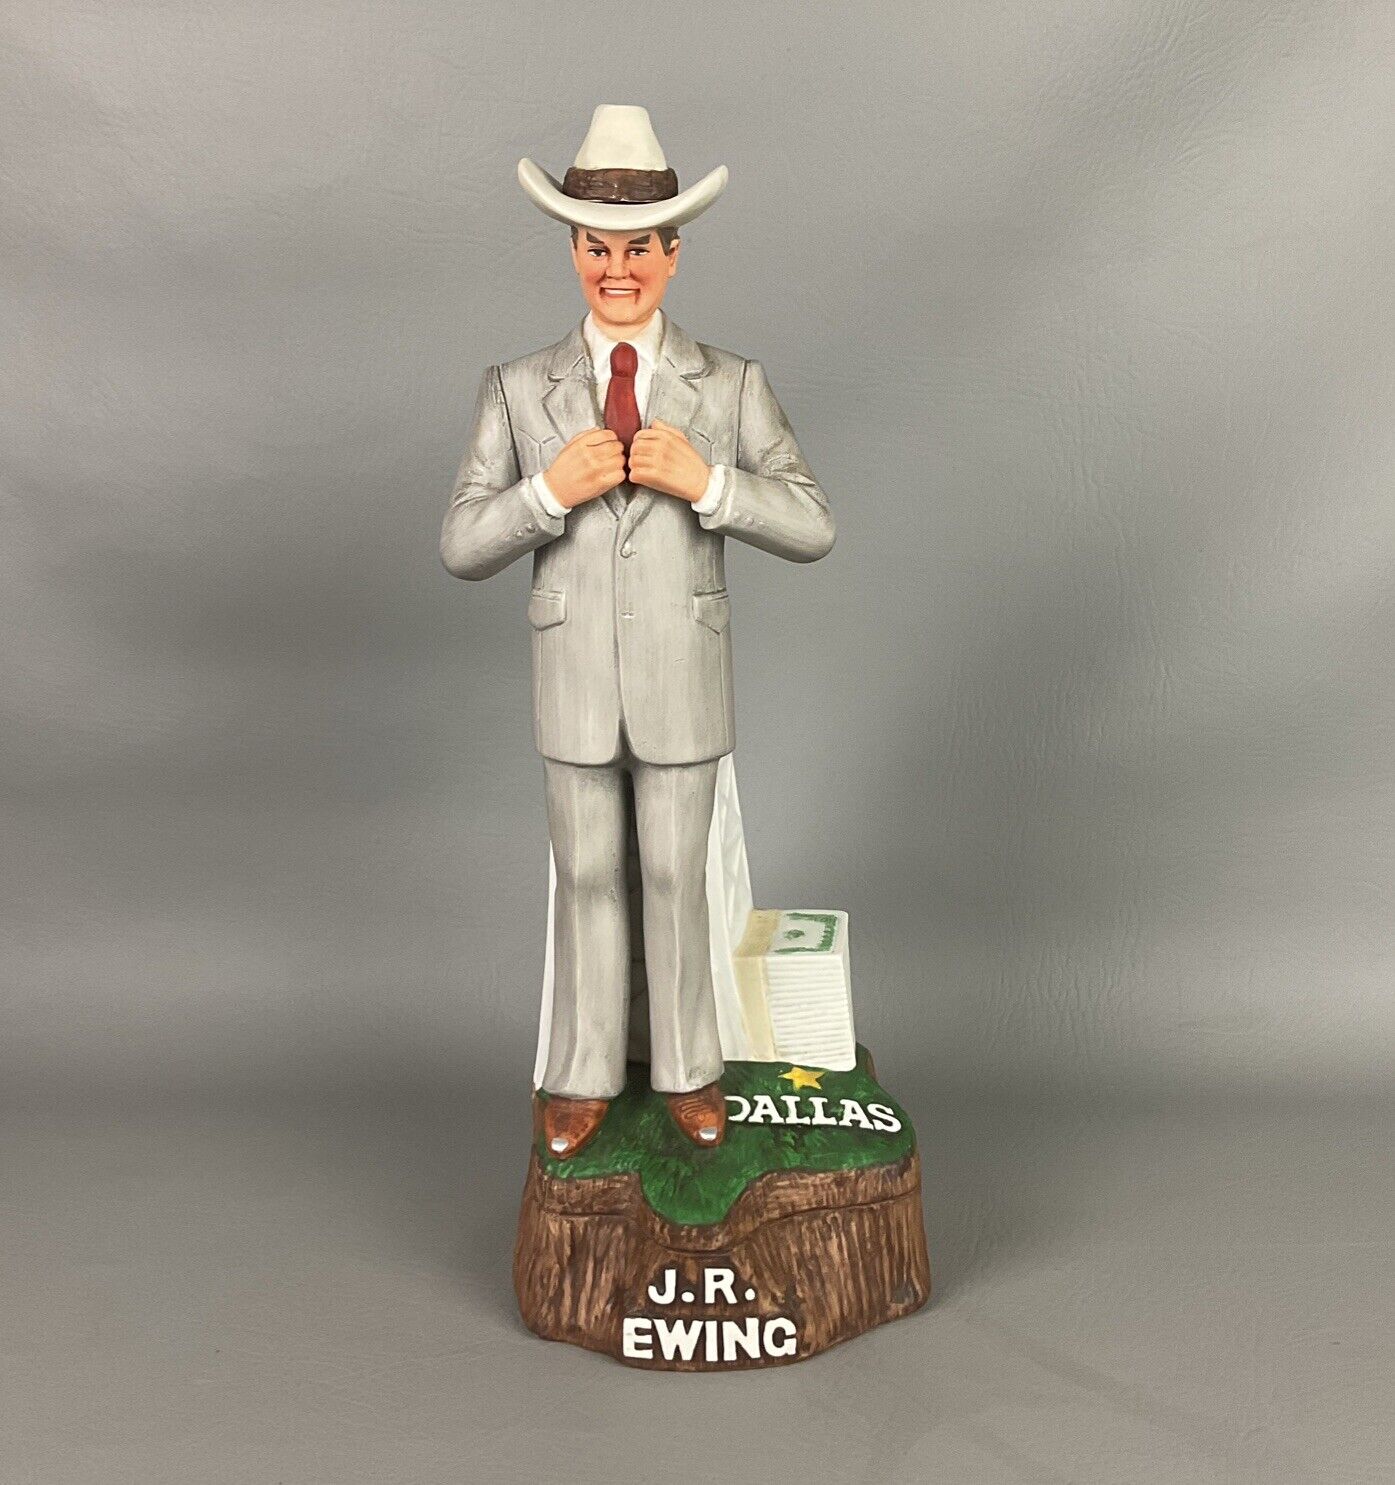 J.R EWING Whiskey Decanter from Dallas Tv show empty music box works